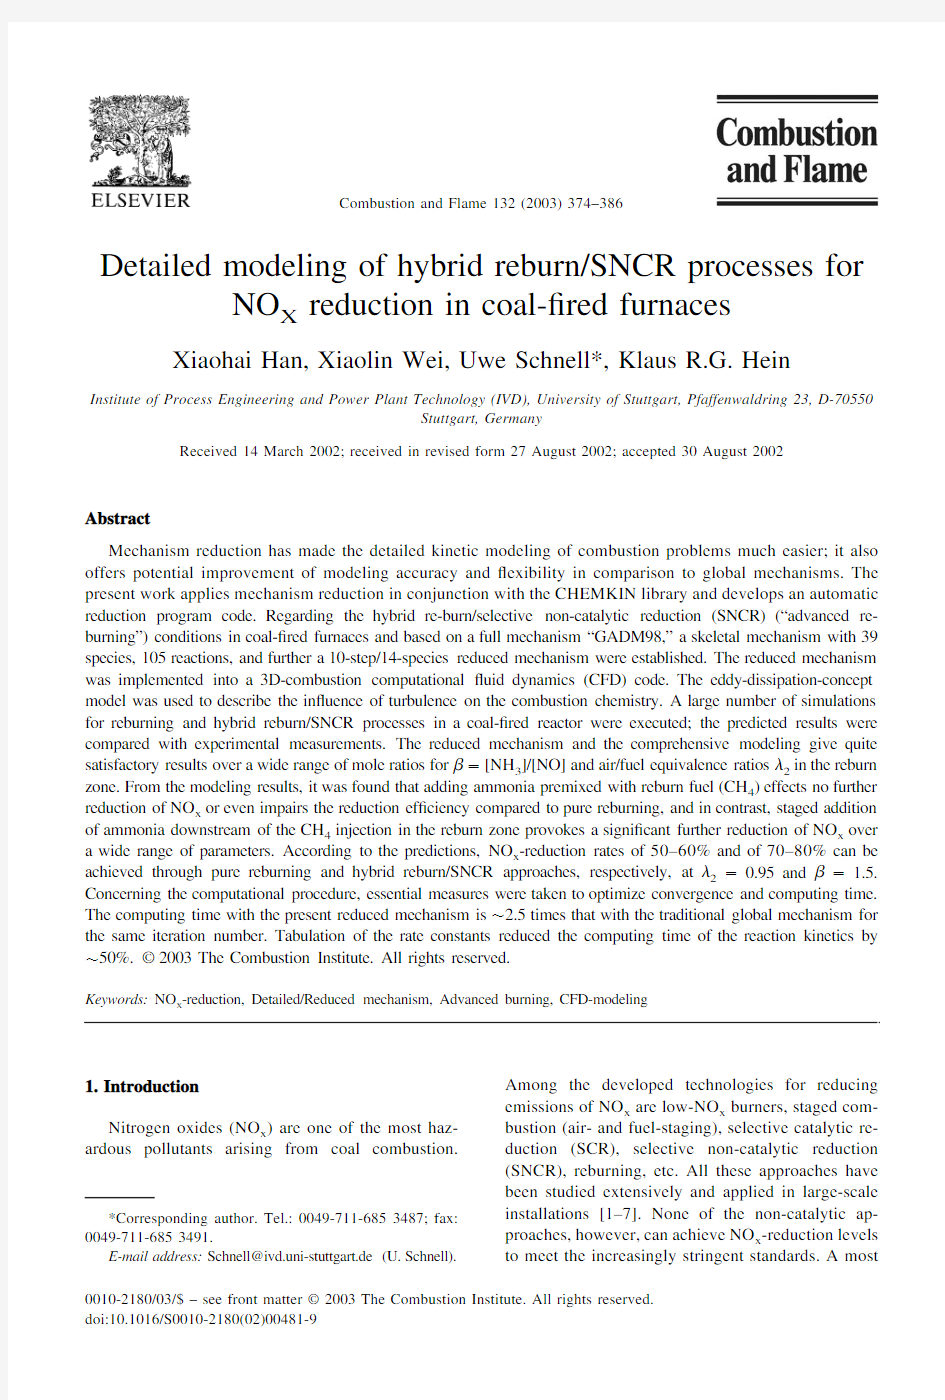 Detailed modeling of hybrid reburn-SNCR processes for NOX reduction in coal-fired furnaces